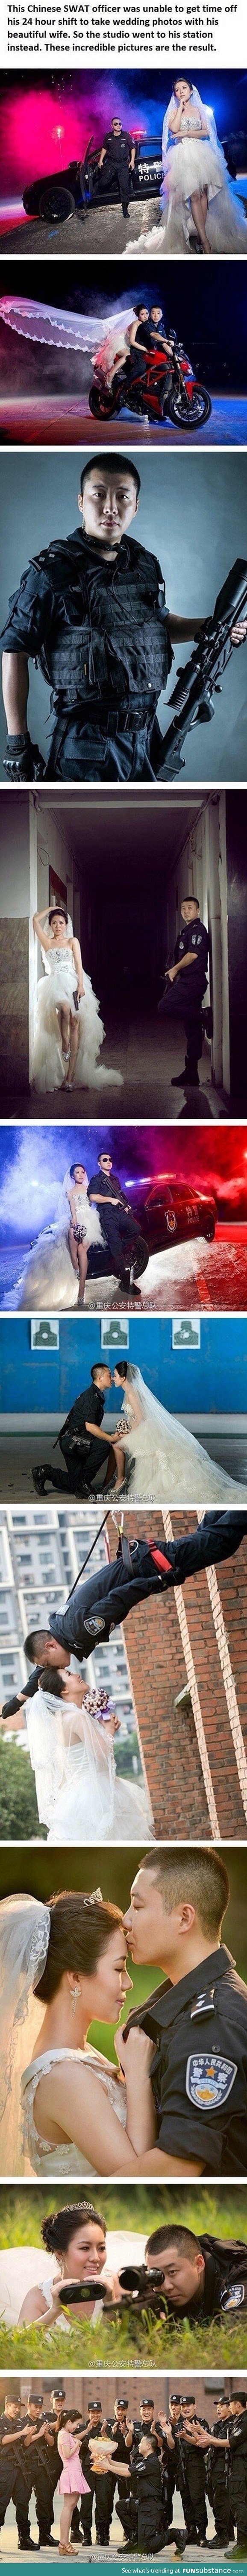 A police marriage photo shoot